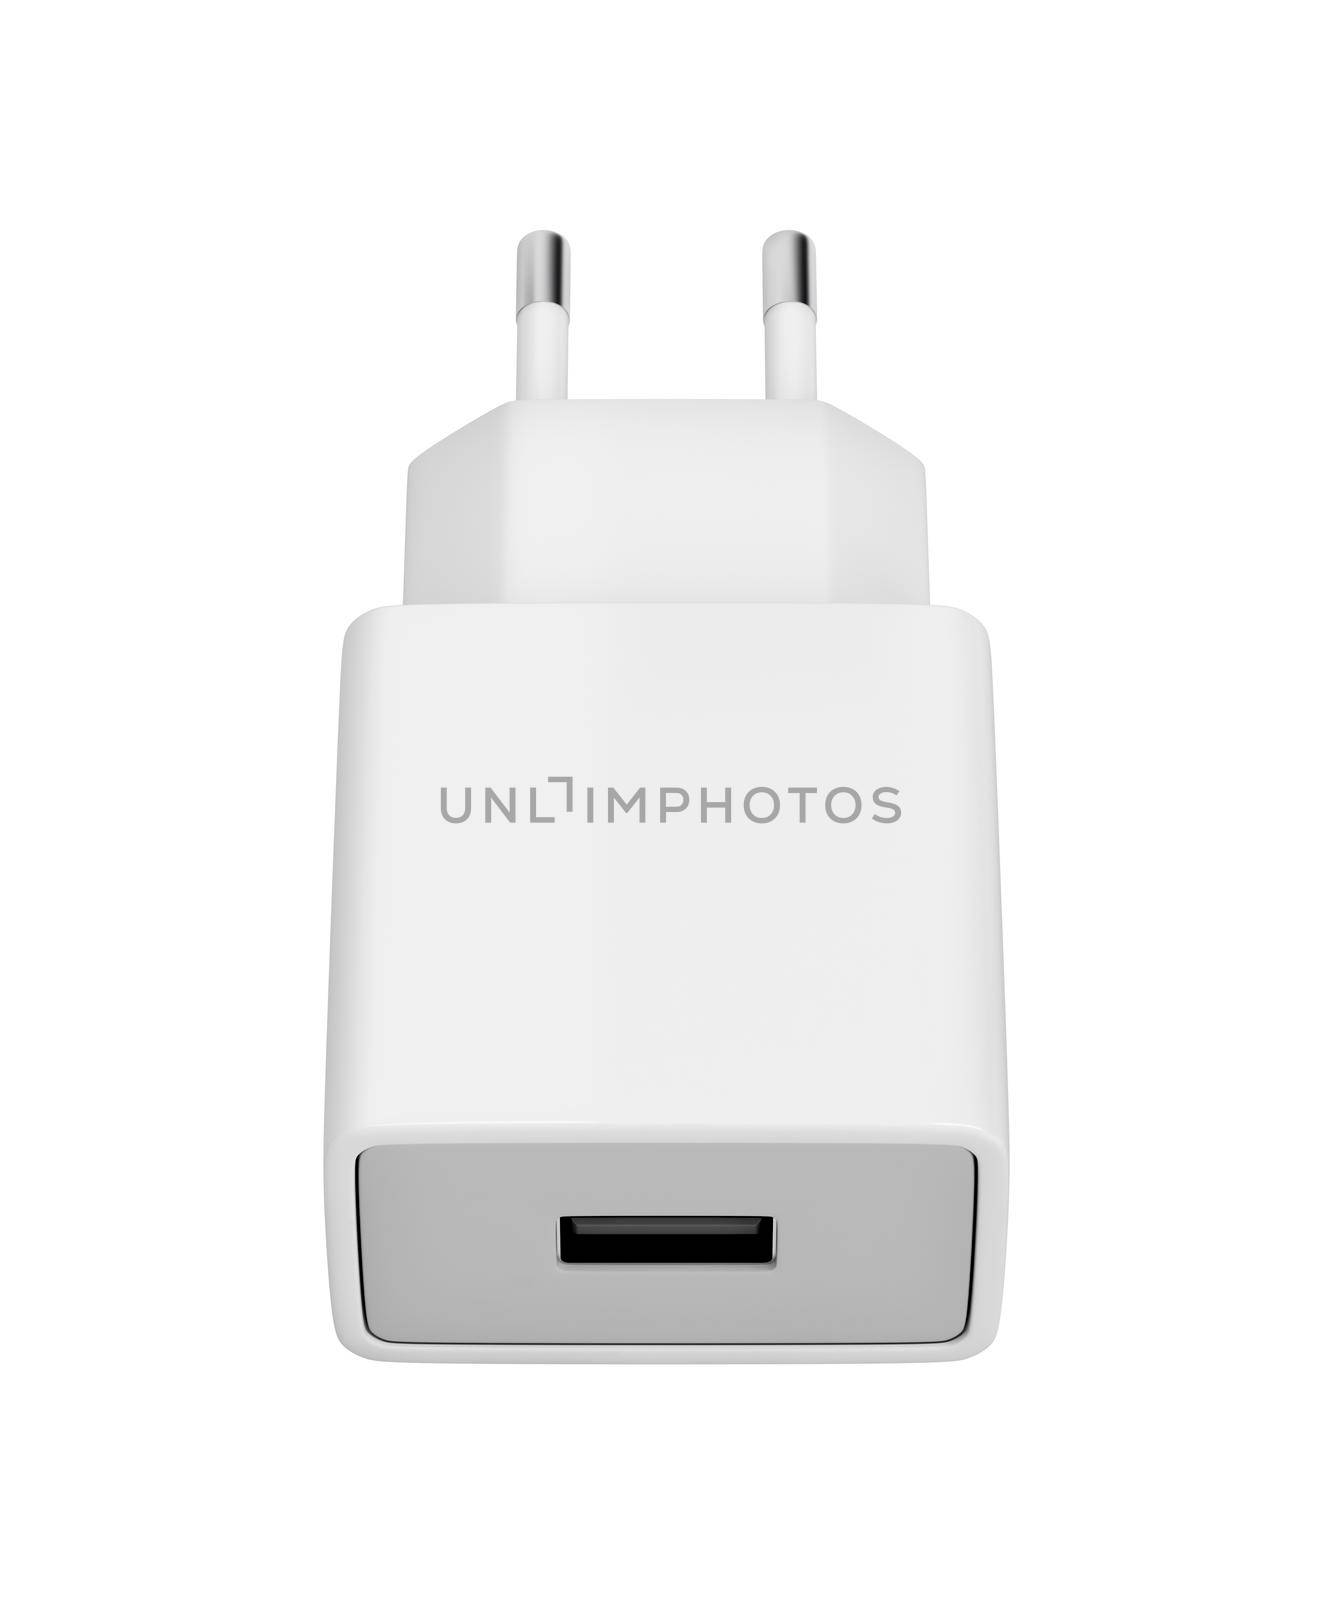 Smartphone power adapter by magraphics